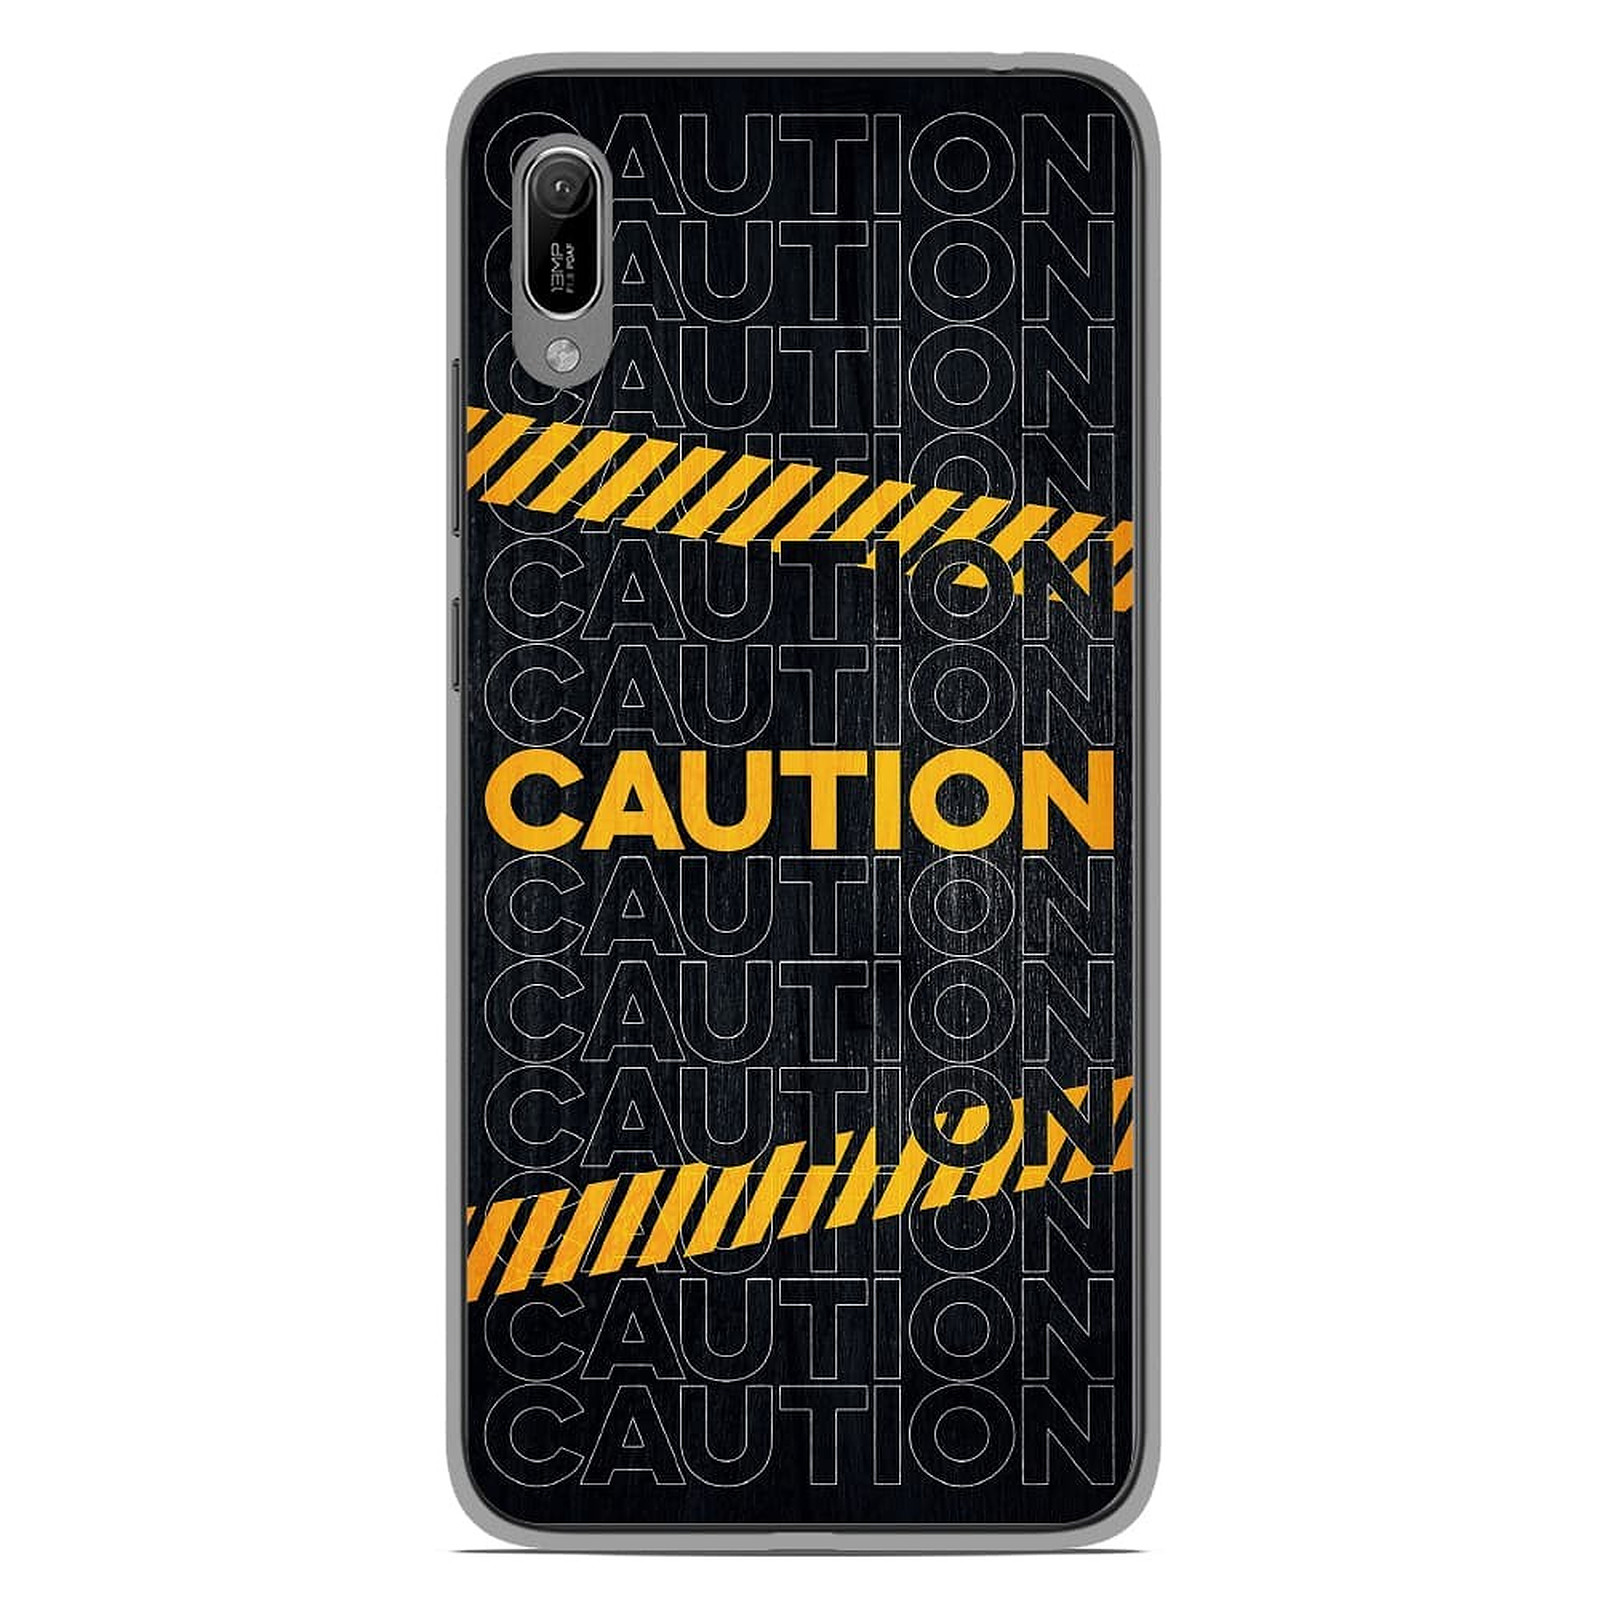 1001 Coques Coque silicone gel Huawei Y6 2019 motif Caution - Coque telephone 1001Coques